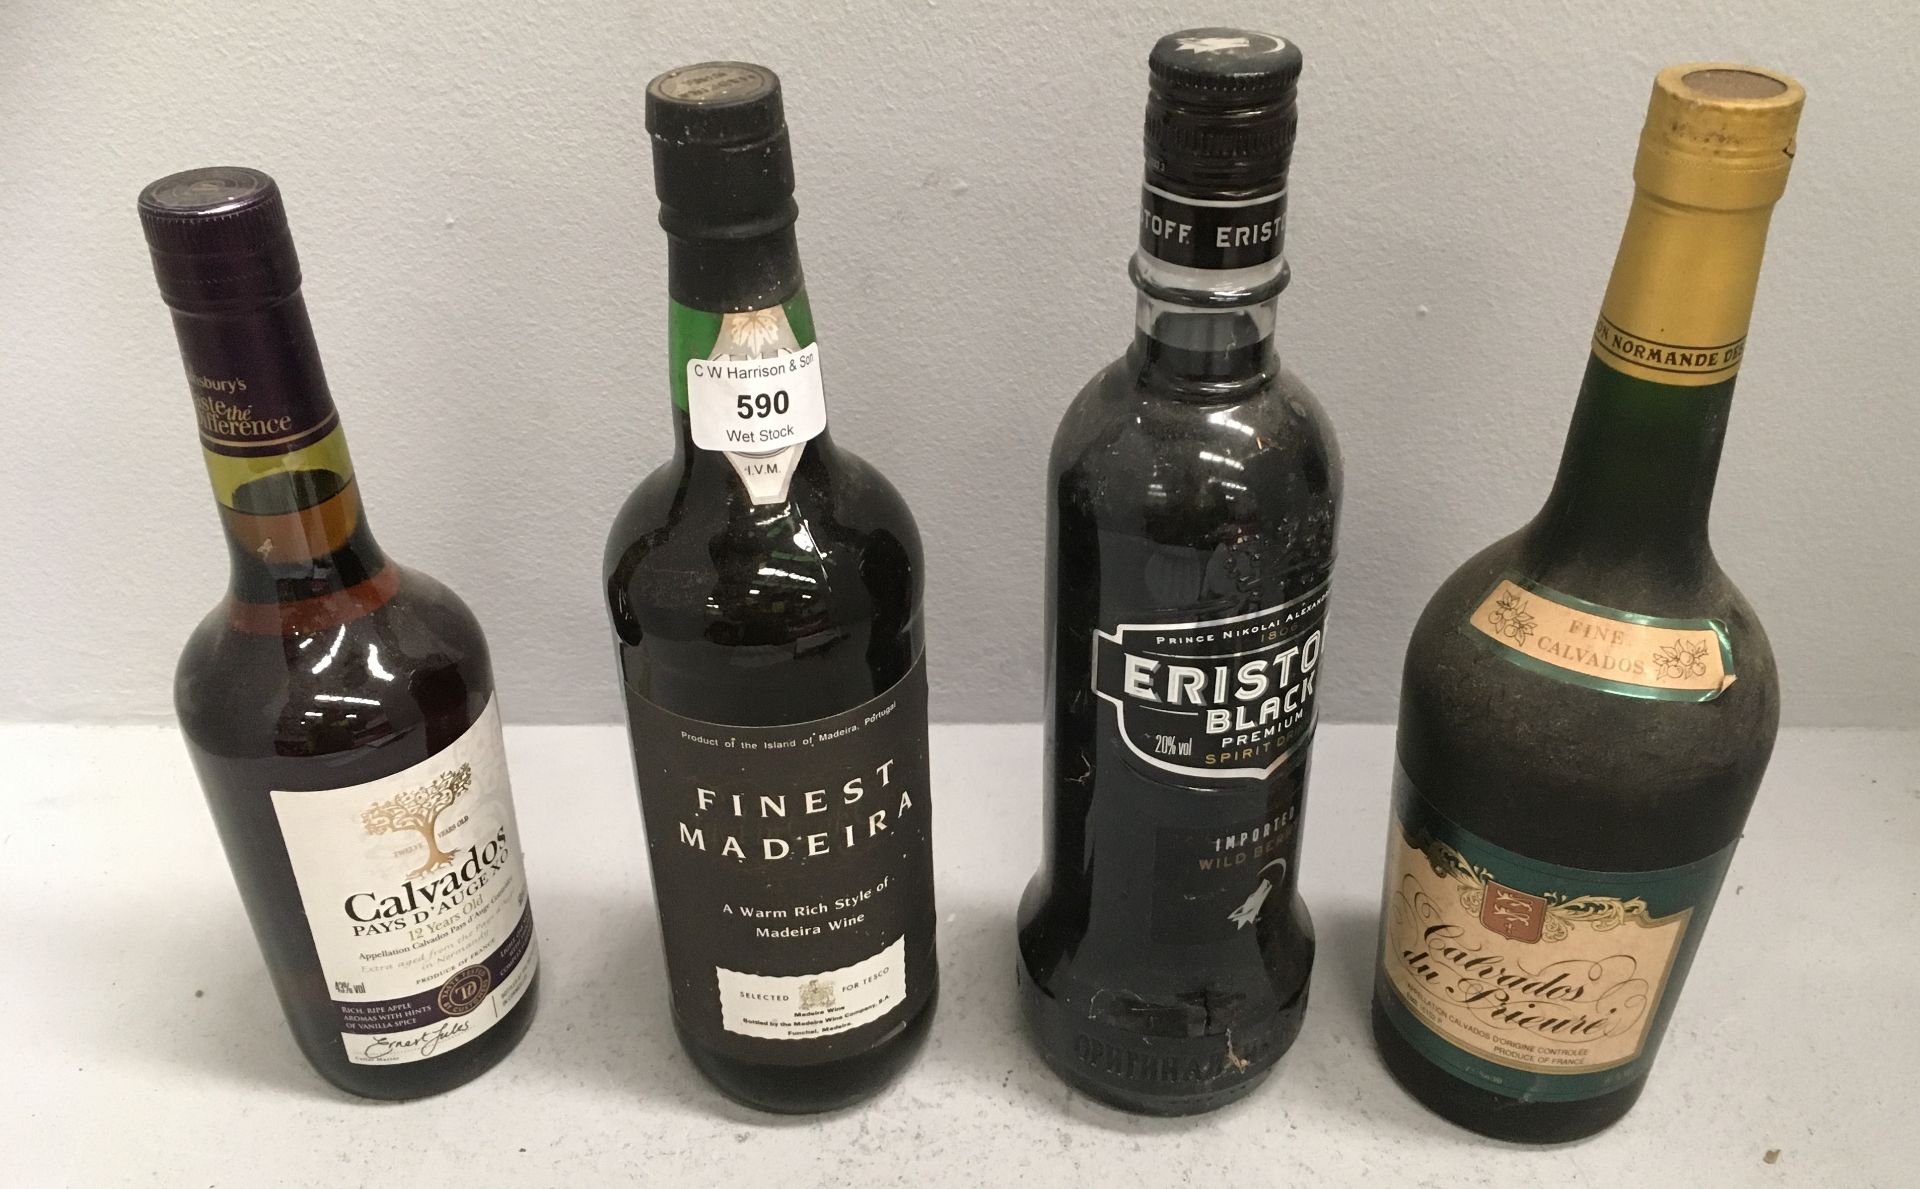 4 x items - 1 x 50cl bottle of Calvados, 1 x 75cl bottle of Madeira,